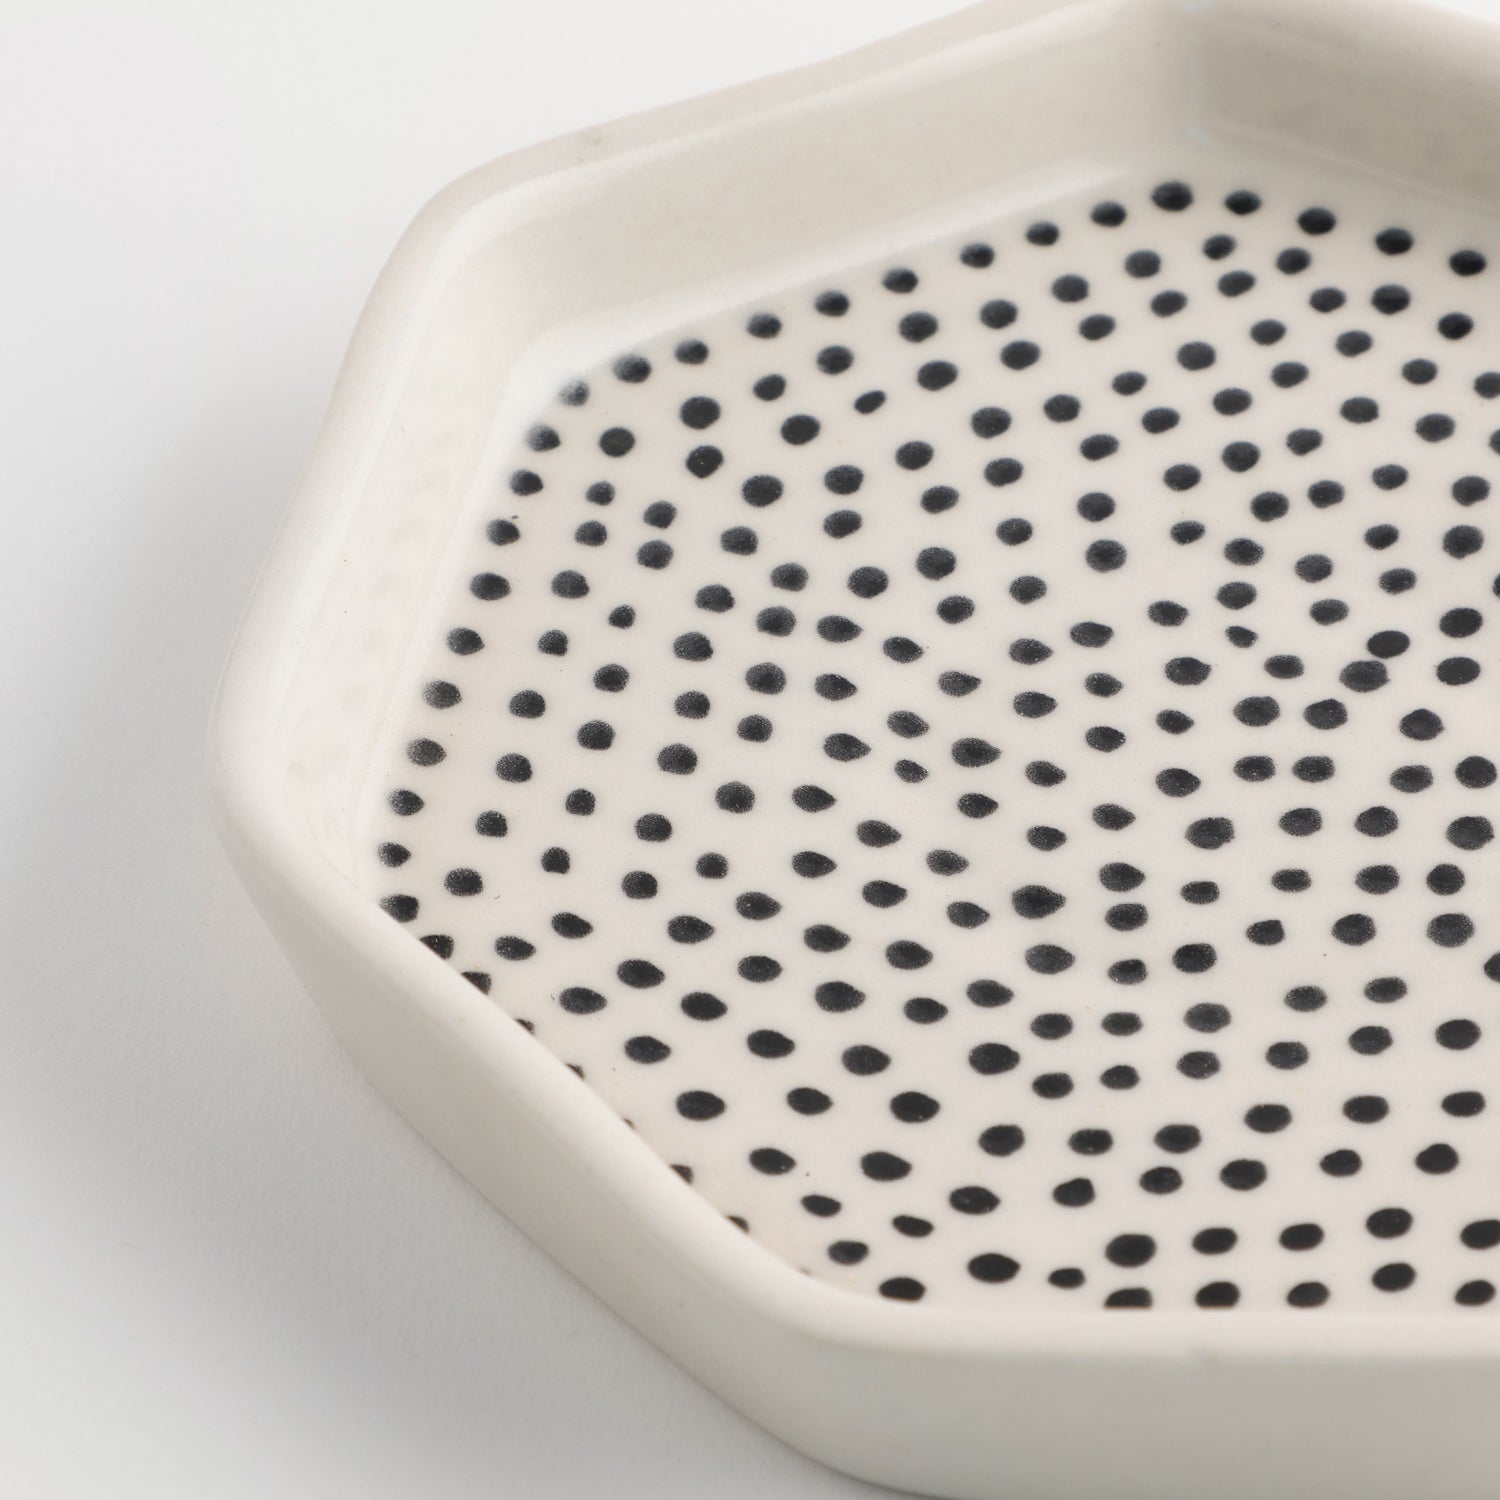 Ceramic Dotted Snack Plate - Septagon  6.5 x 1